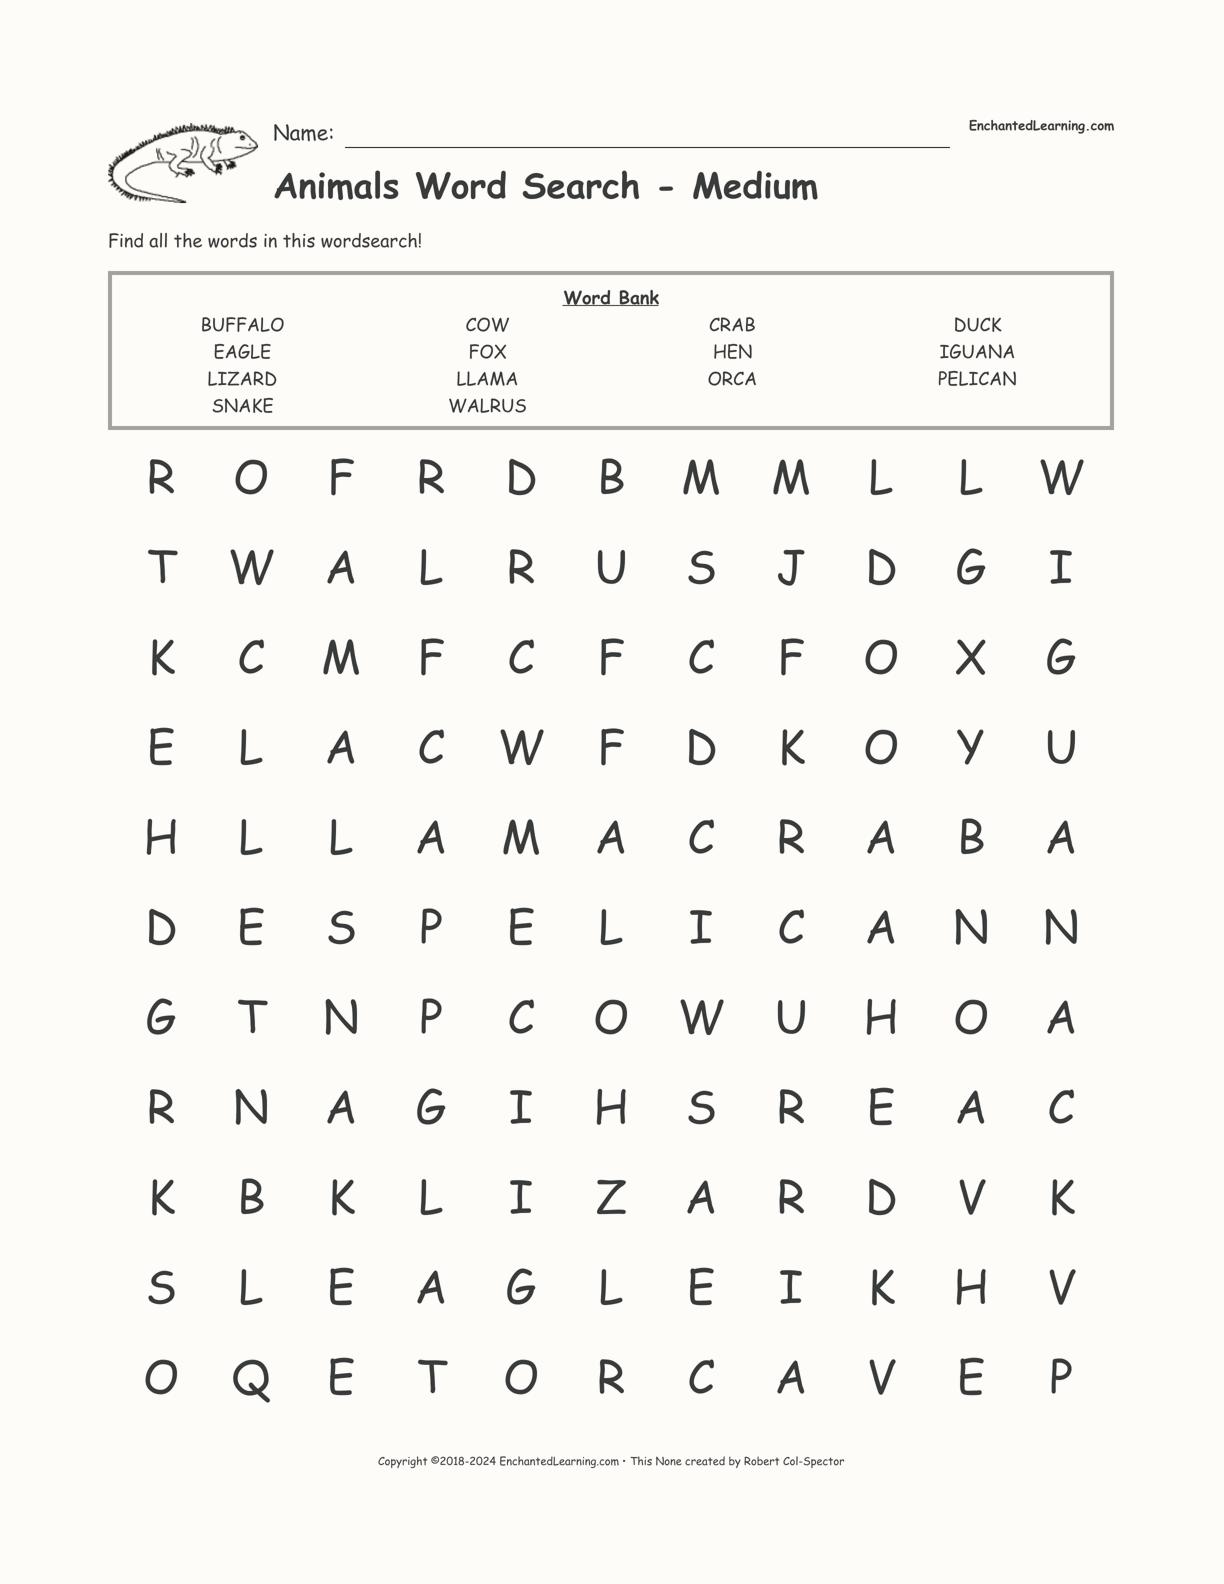 Animals Word Search - 1 (Medium) - Enchanted Learning